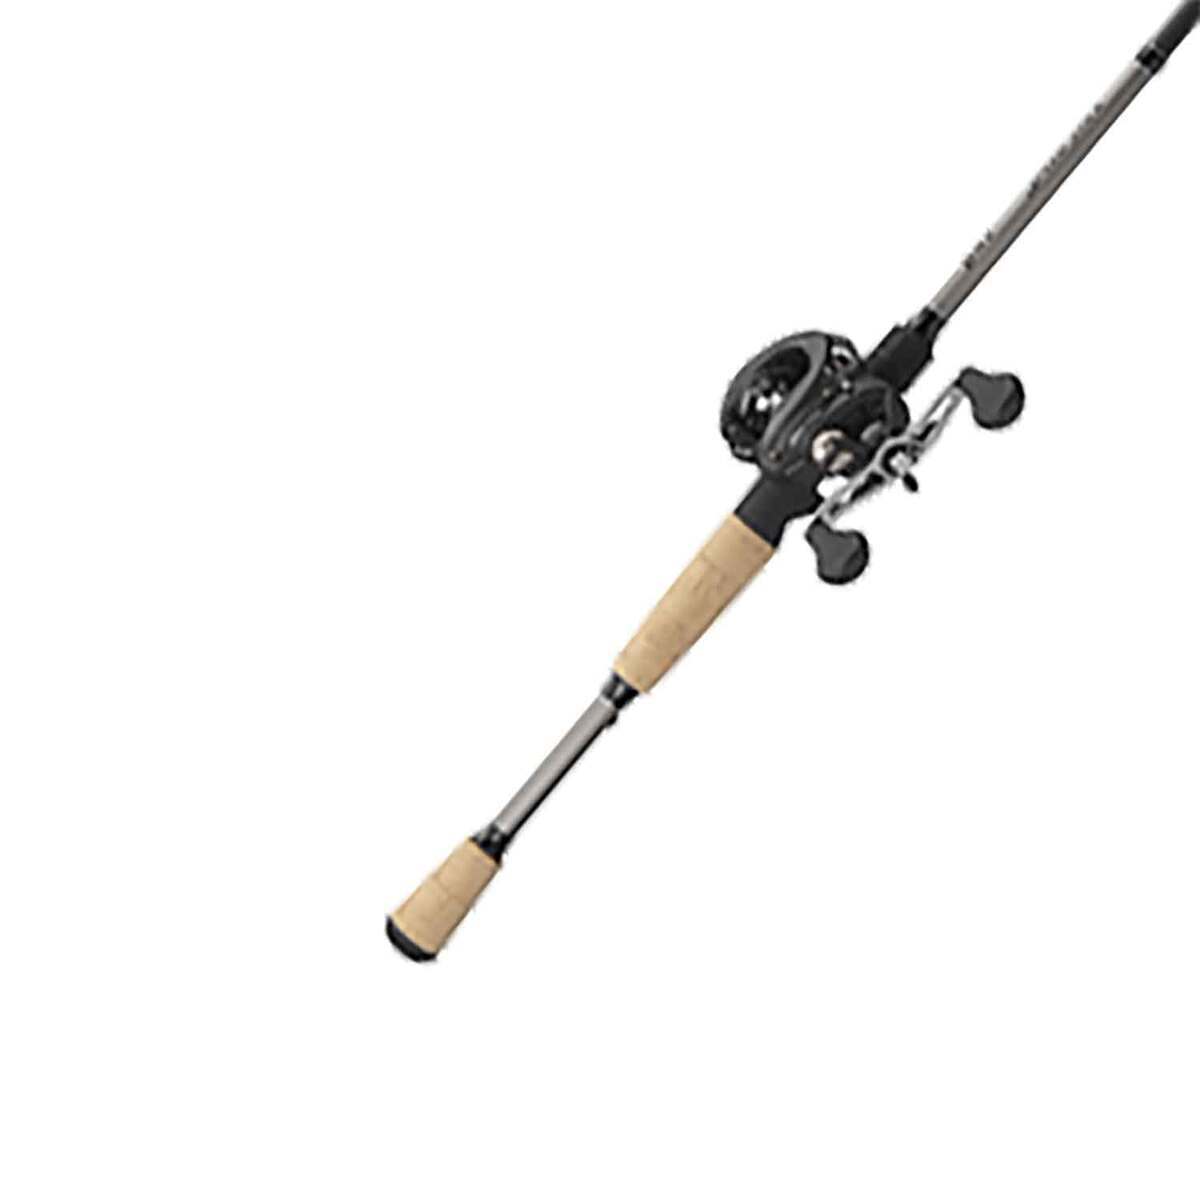 Lew's Speed Spool Baitcast Casting Rod and Reel Combo - 7ft